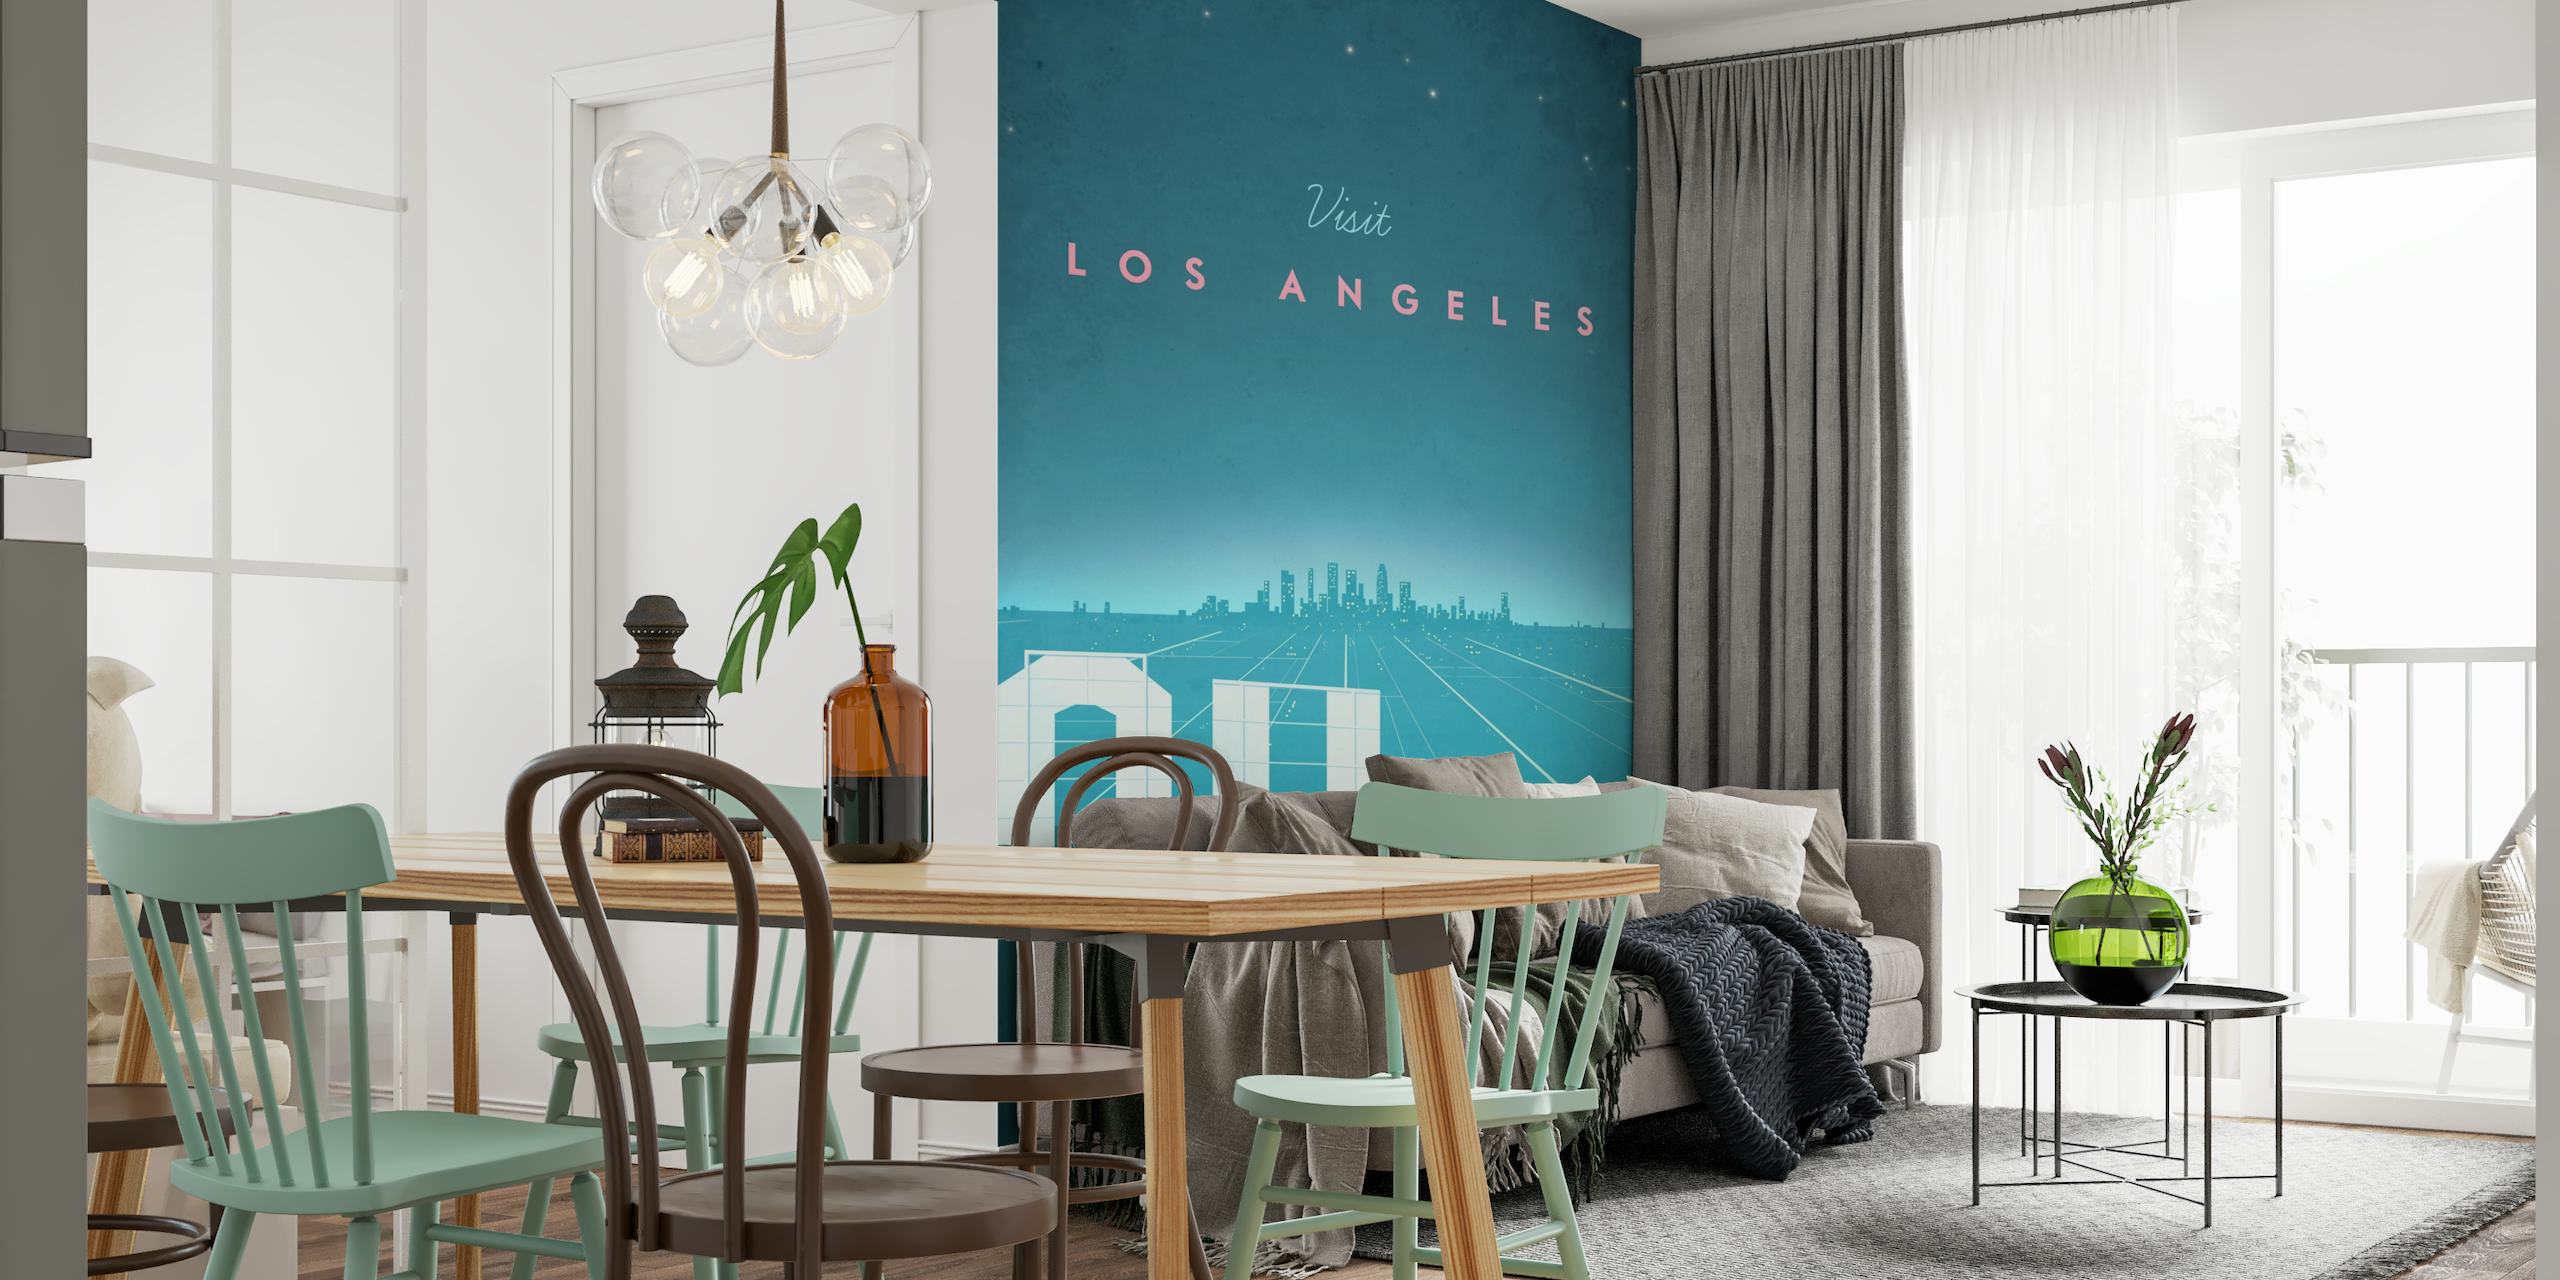 Los Angeles Travel Poster tapete